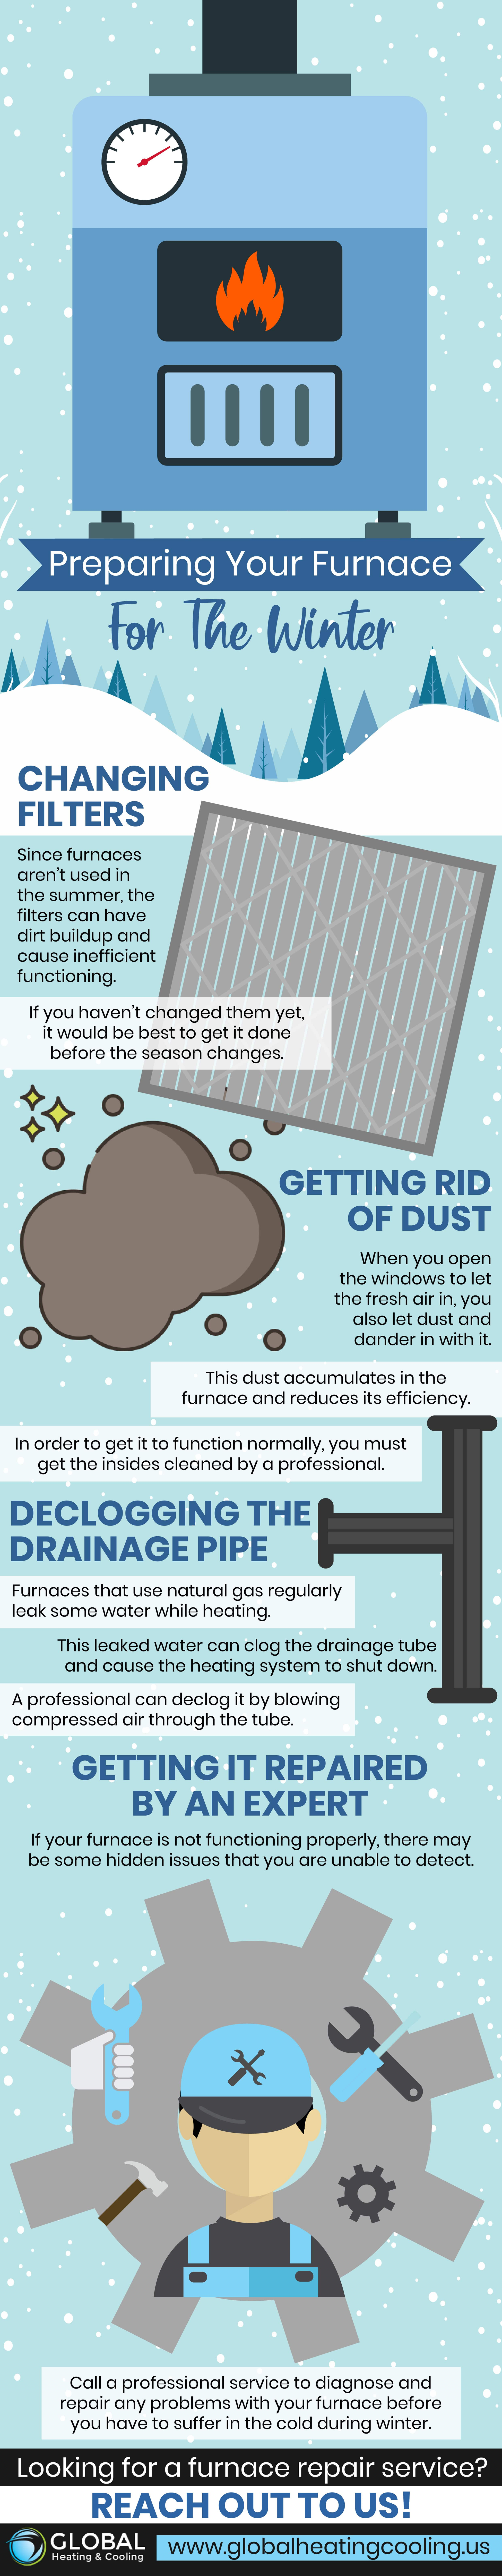 Preparing Your Furnace For The Winter